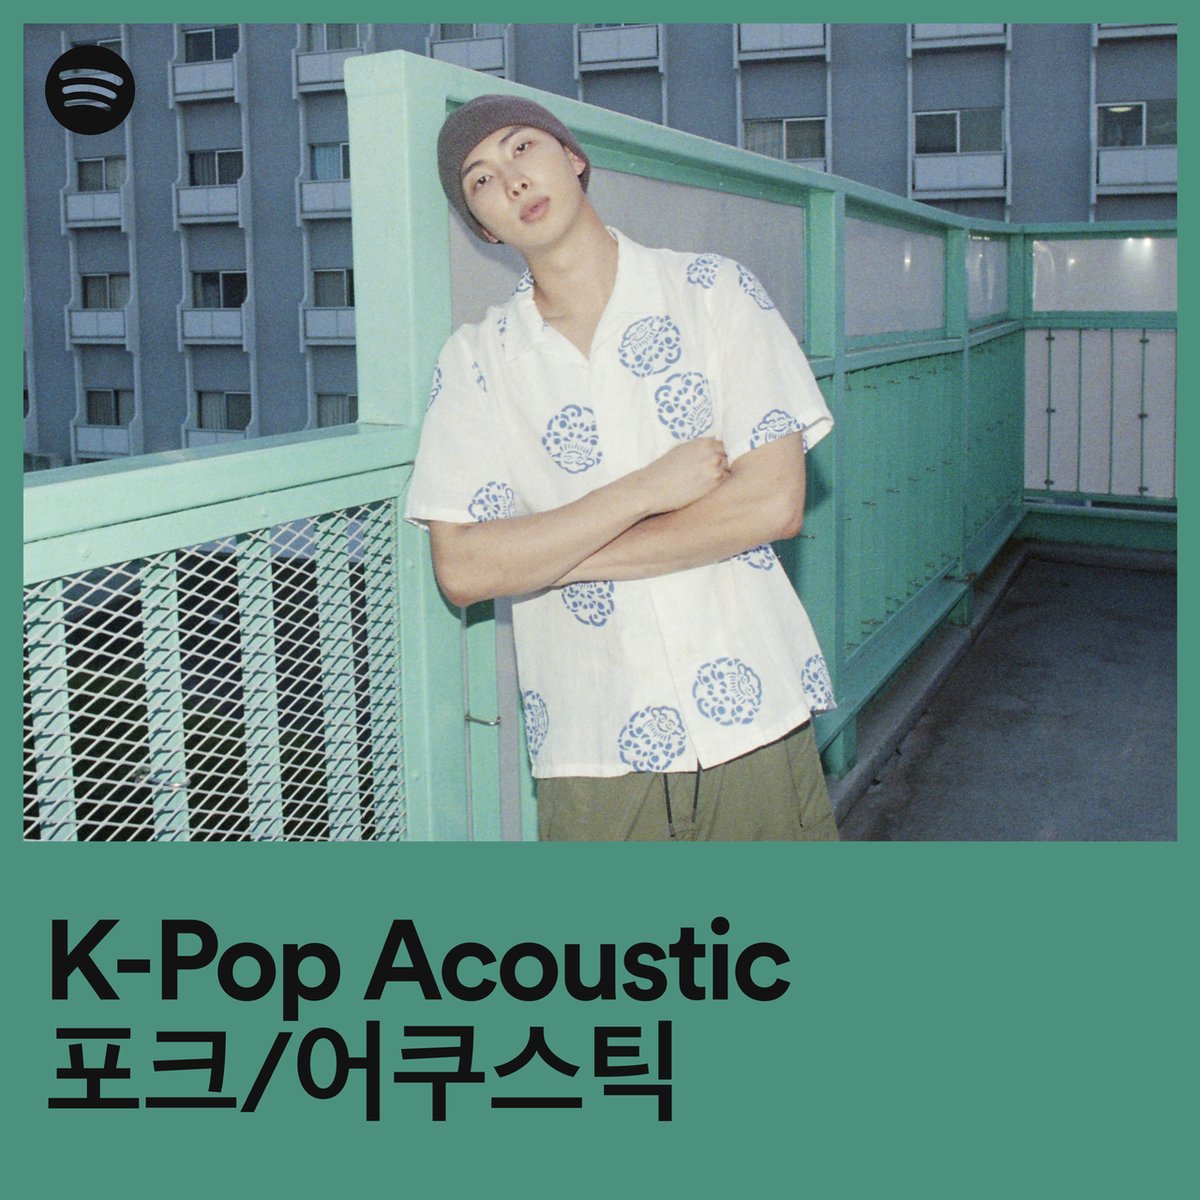 Check out 'Come back to me' on K-Pop Acoustic @Spotify right now! 🎧 open.spotify.com/playlist/37i9d… #RM #Comebacktome #RightPlaceWrongPerson